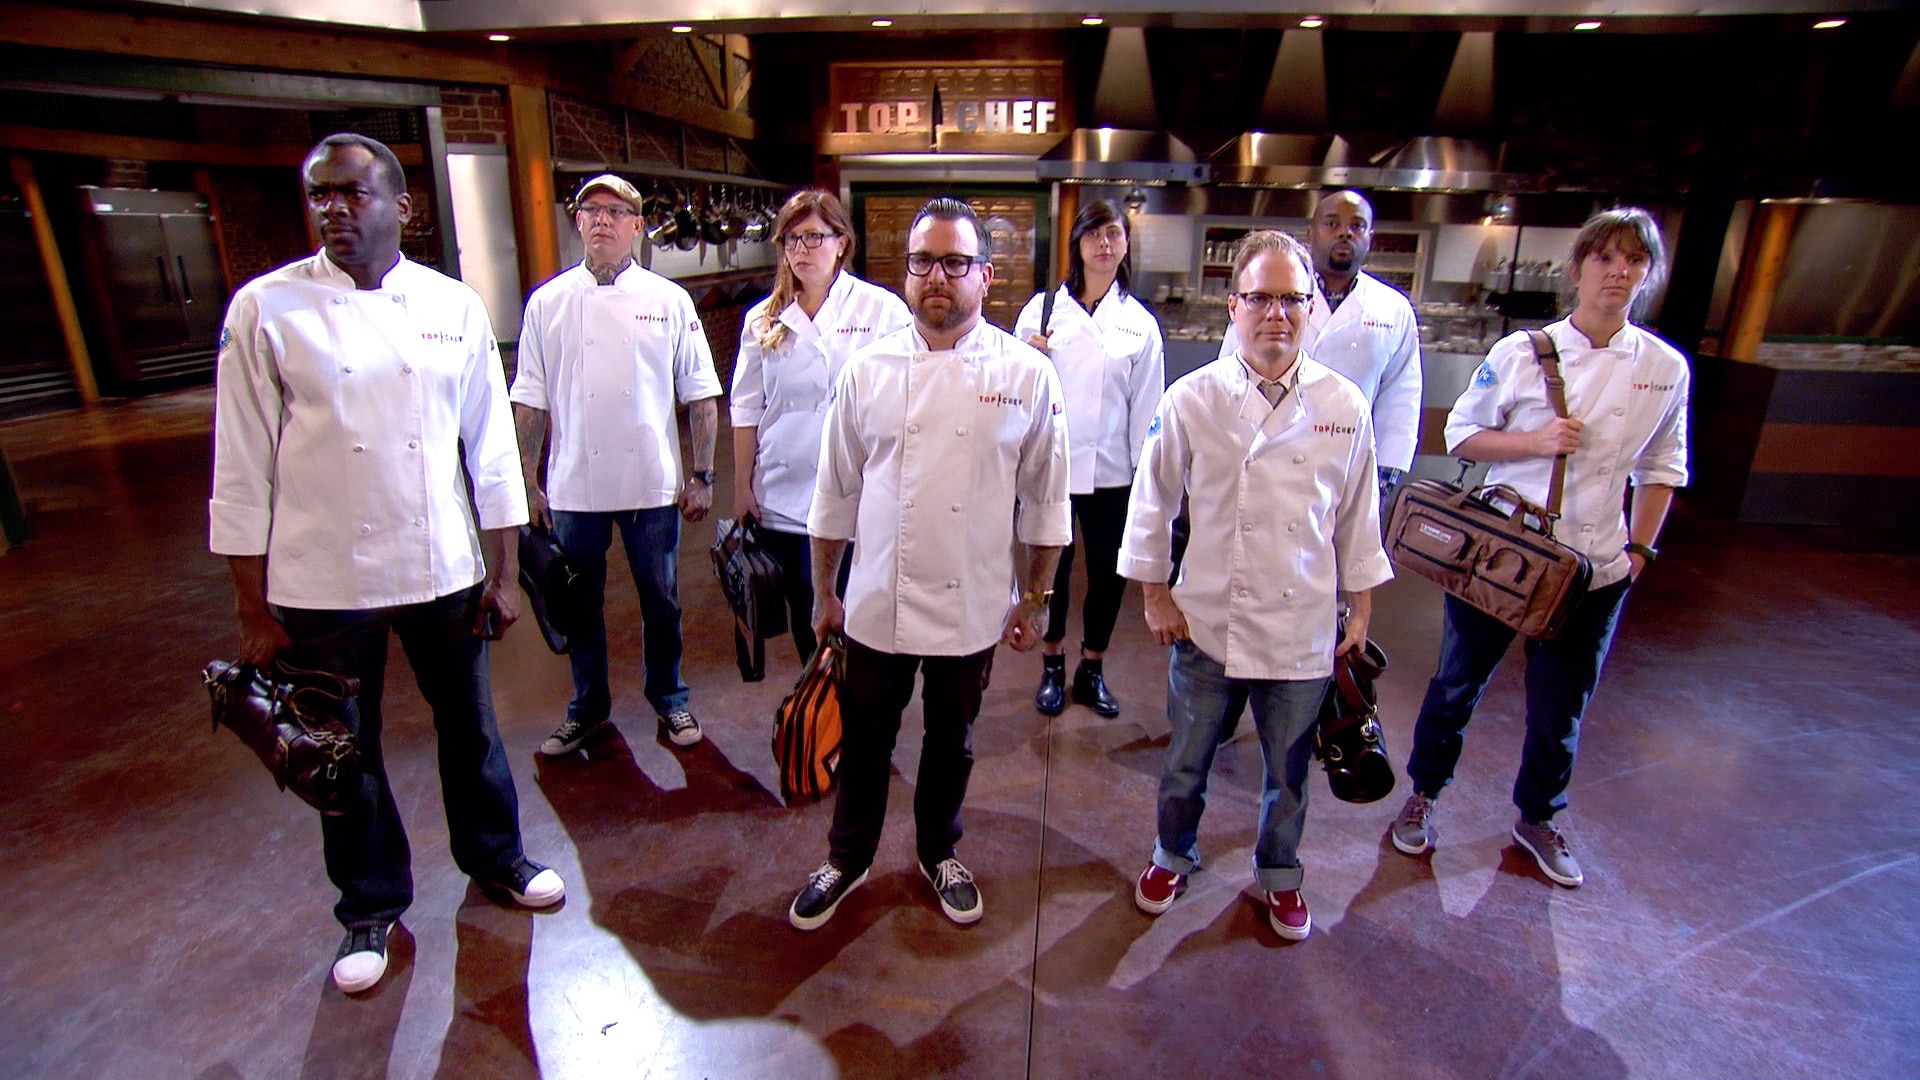 Watch Introducing Top Chef 14's Rookie Chefs | Top Chef 14 Video